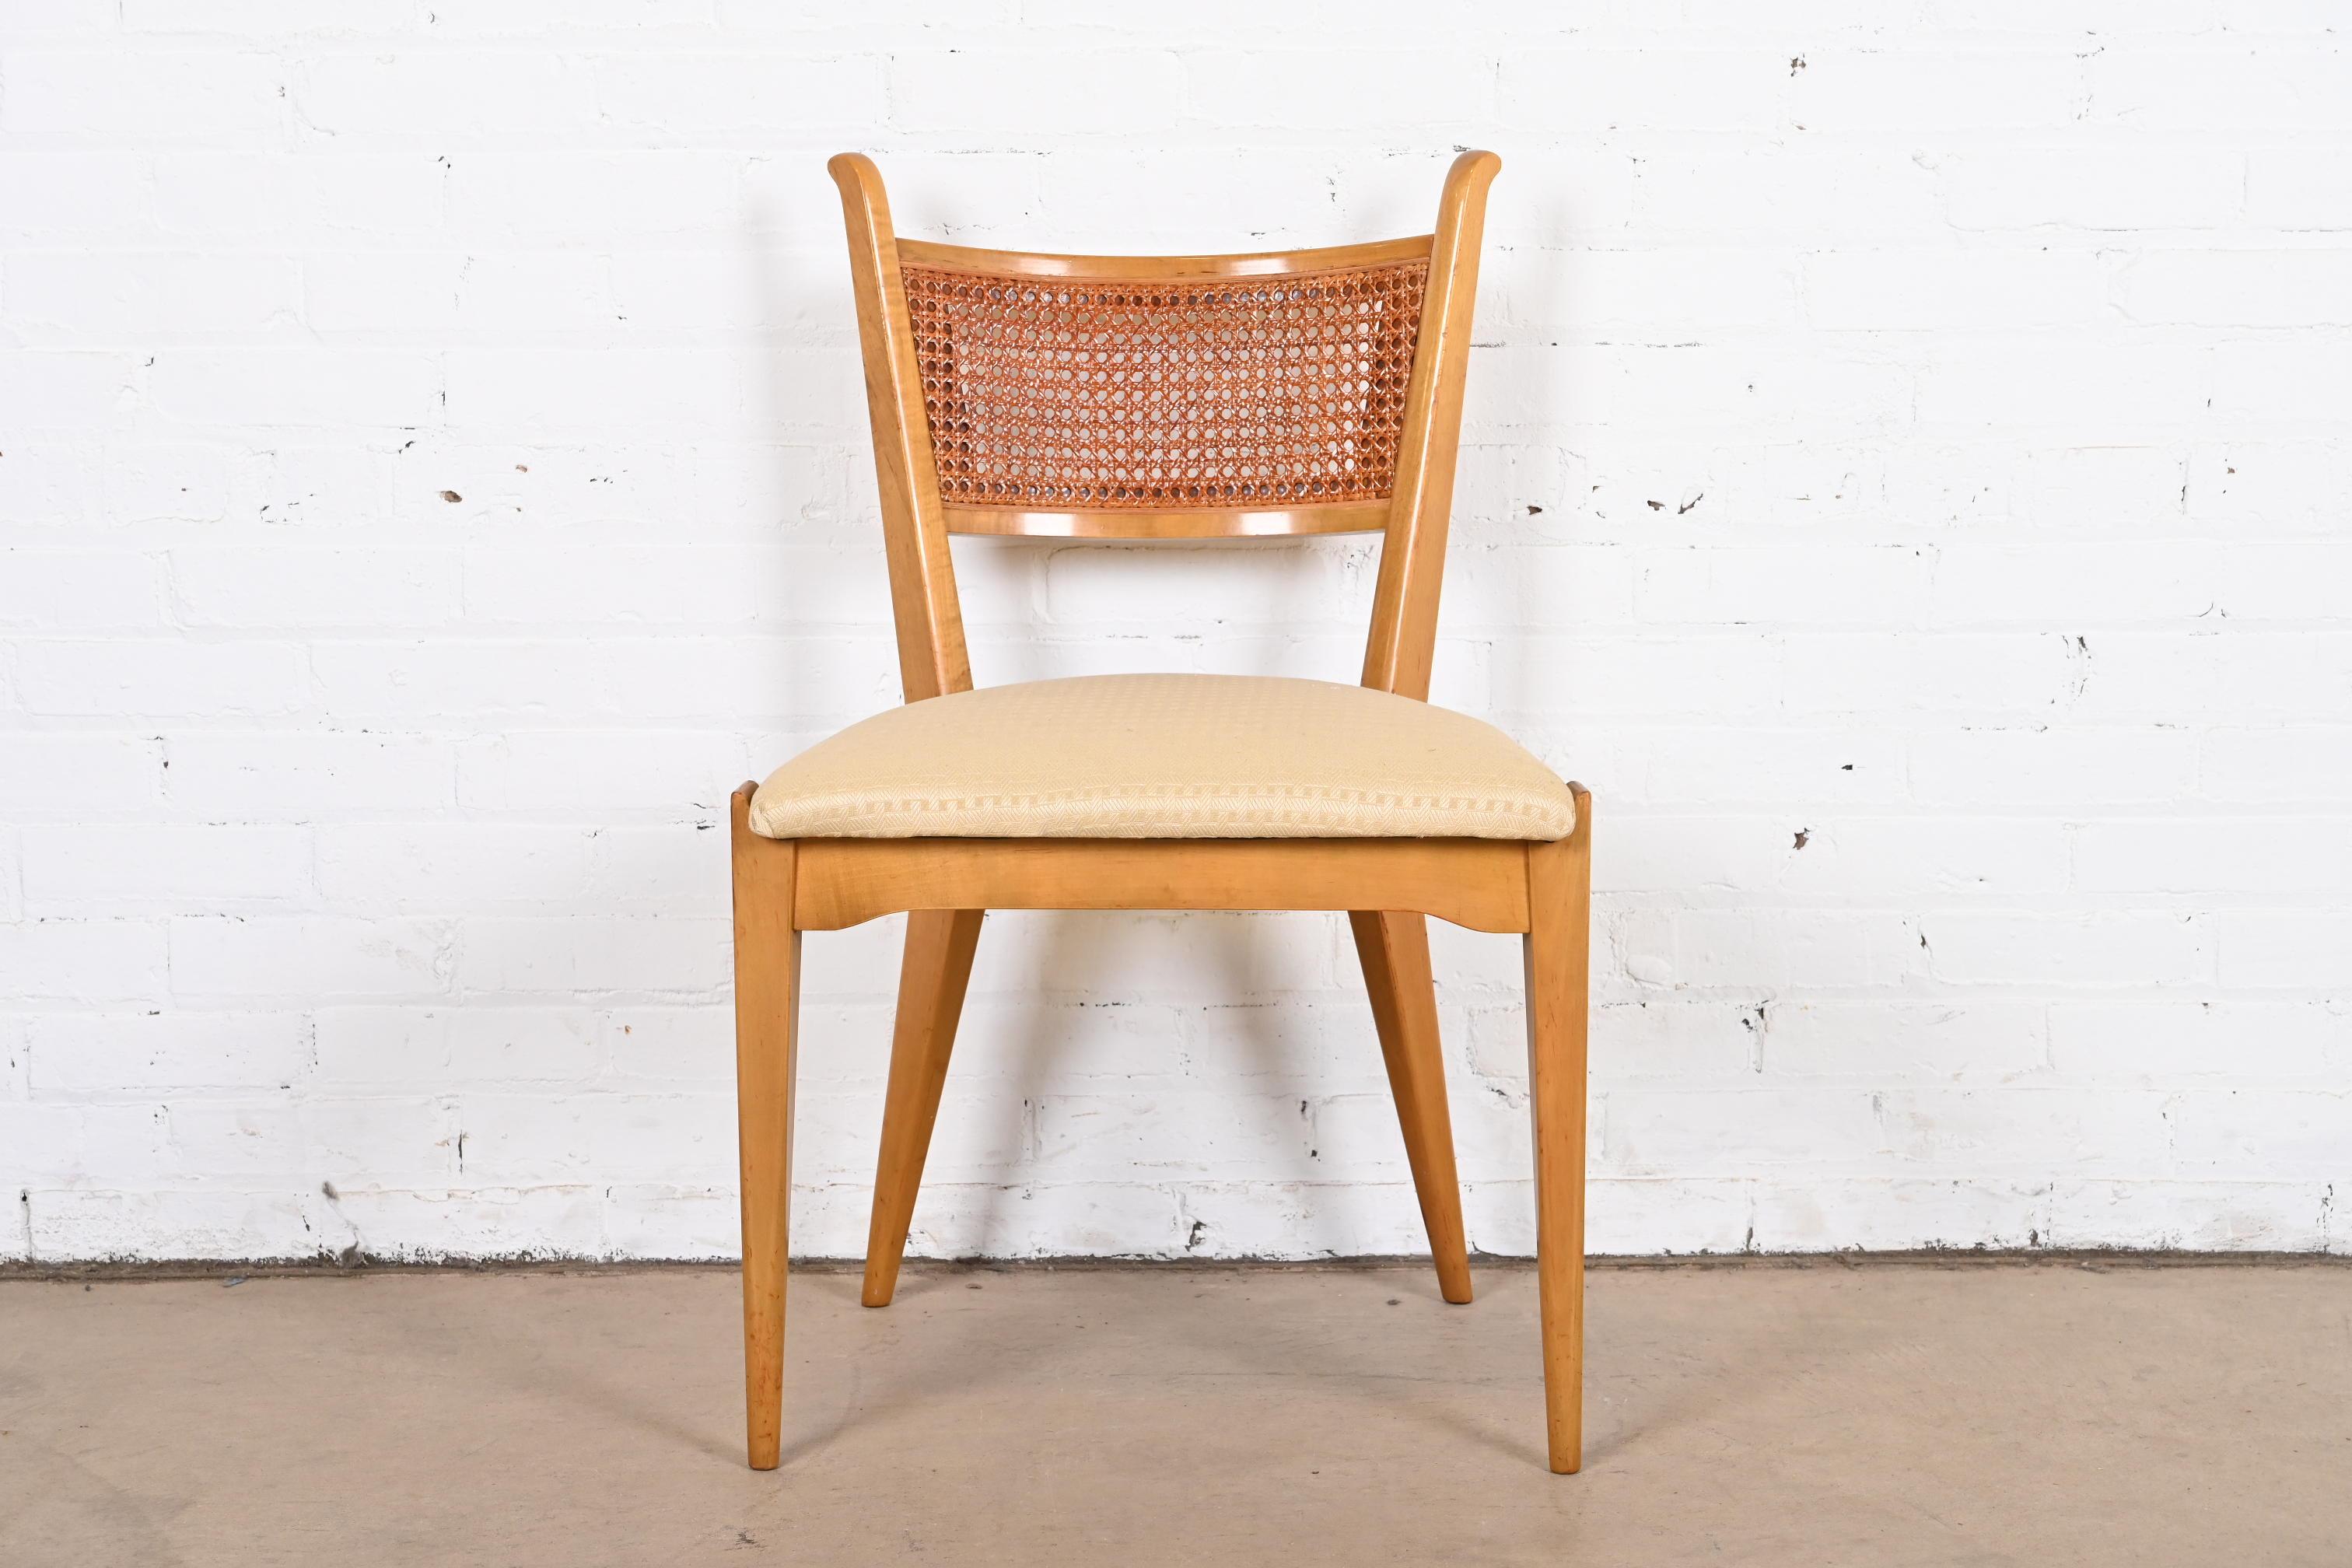 Edmond Spence Swedish Modern Sculpted Maple and Cane Dining Chairs, Set of Four For Sale 5